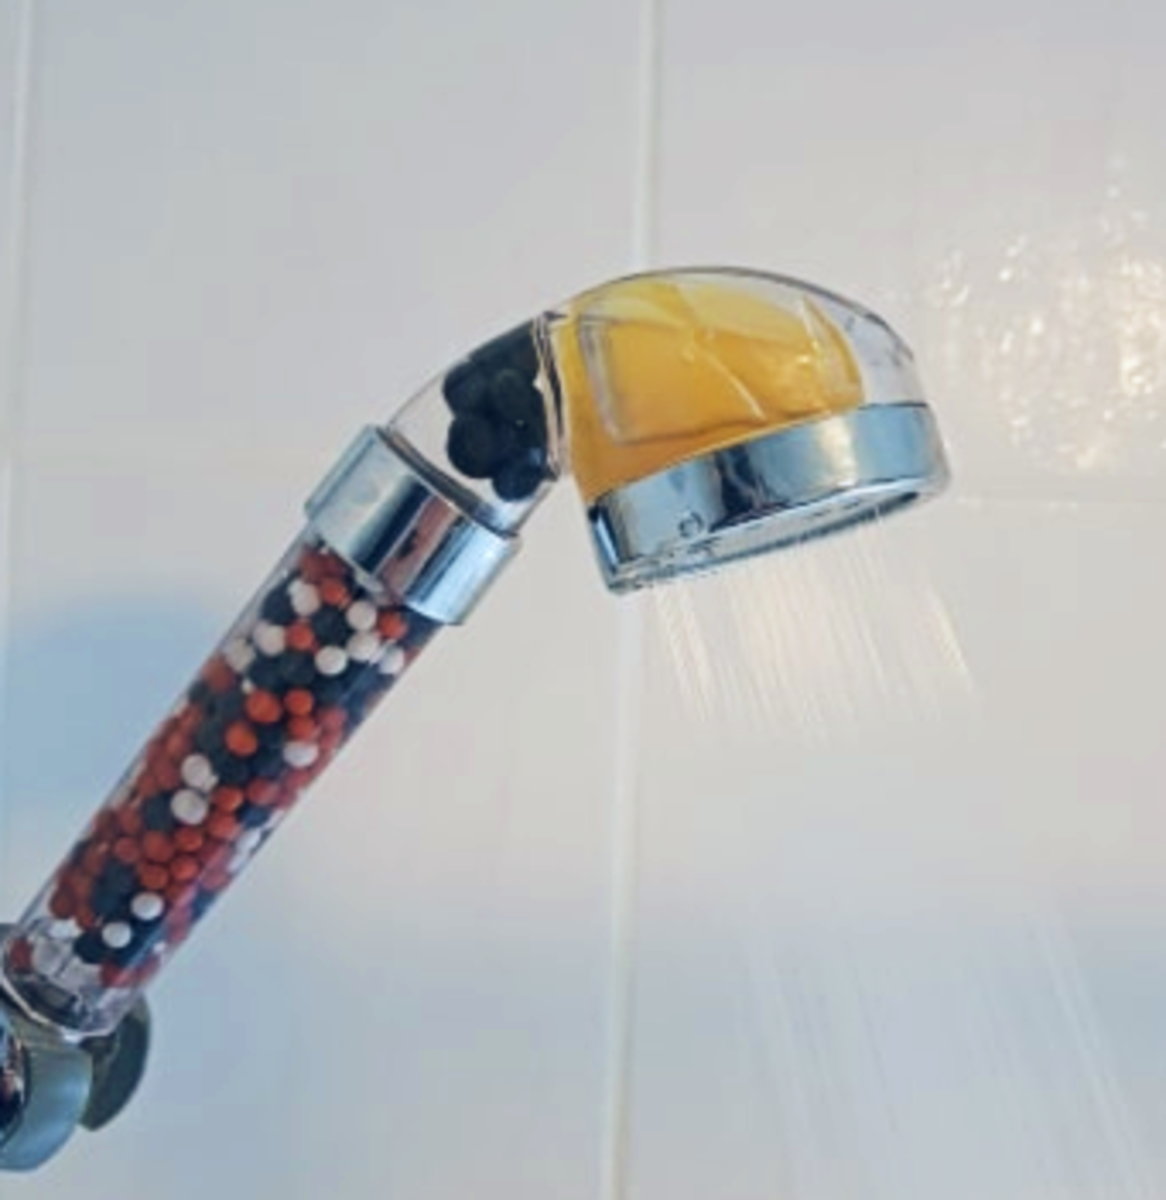 Vitamin C Filtering Shower-Heads - Are They Any Good?